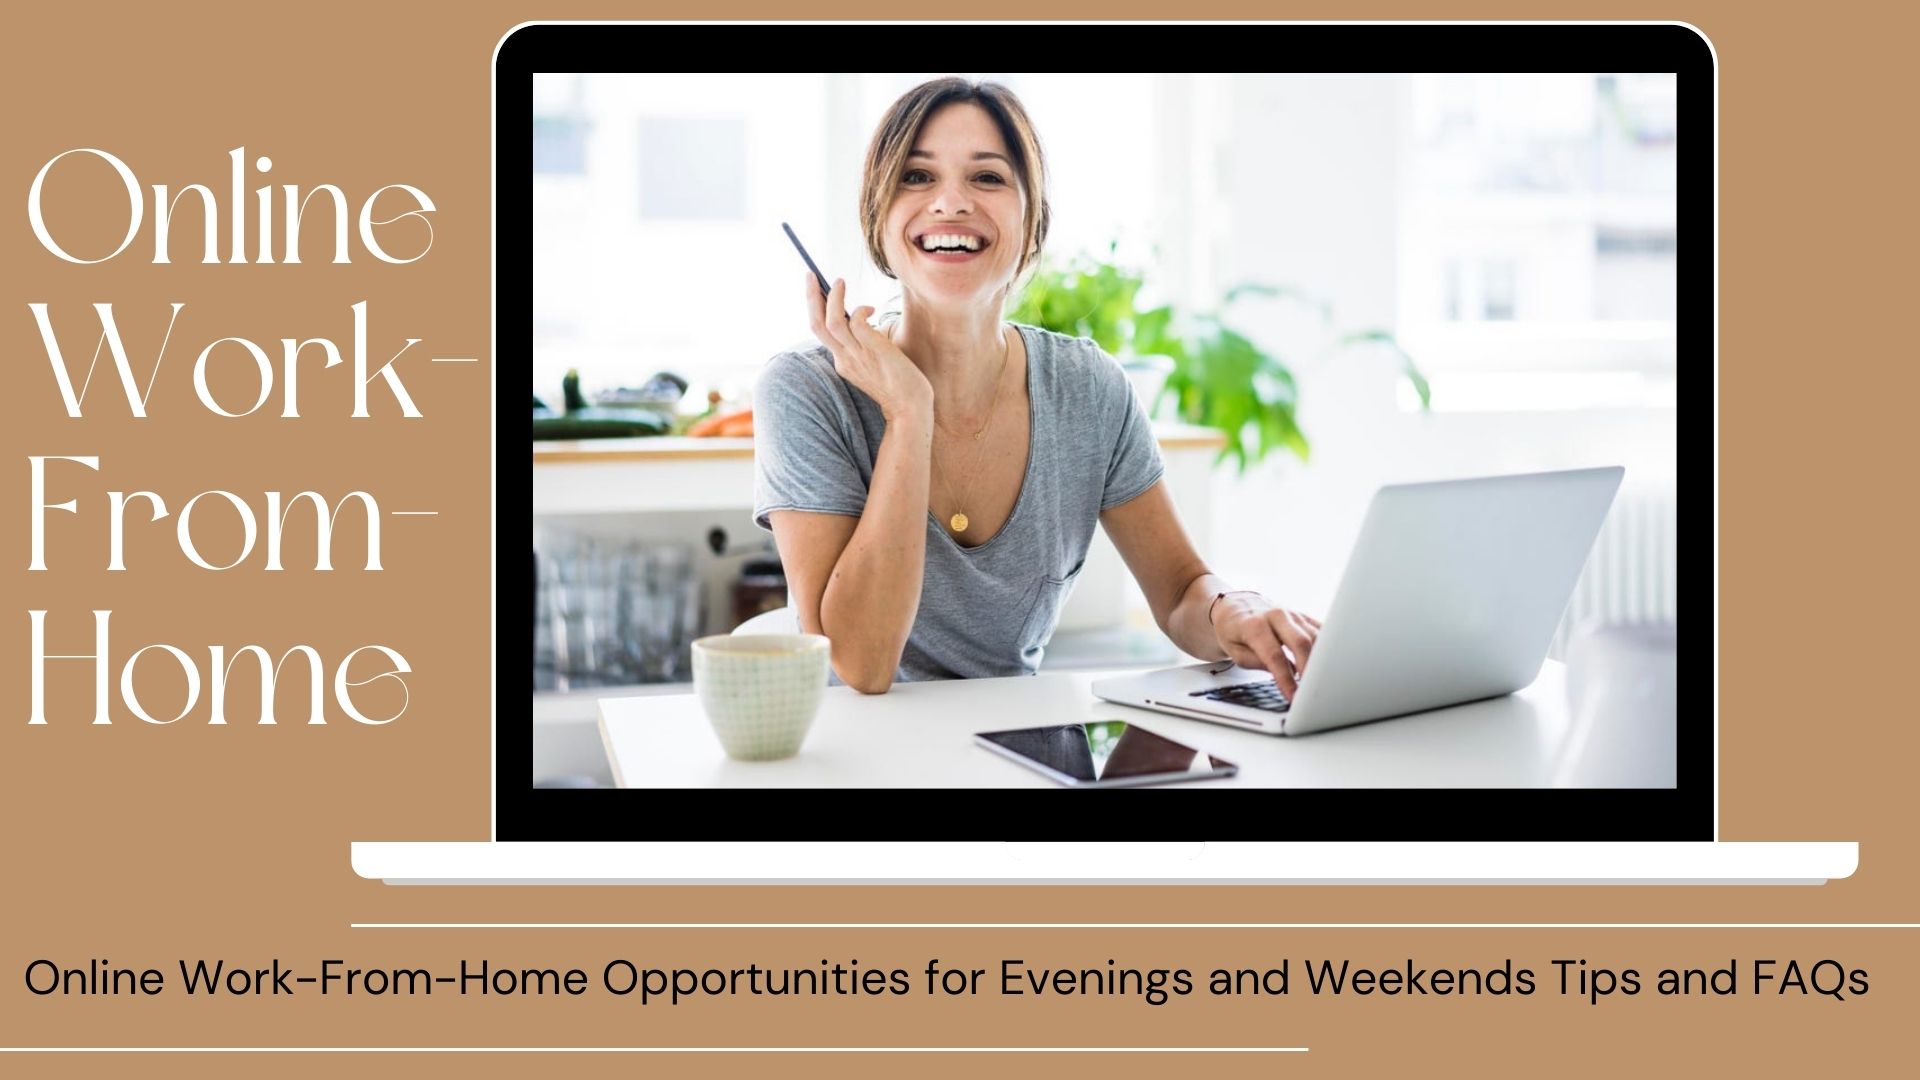 Online Work-From-Home Opportunities for Evenings and Weekends Tips and FAQs